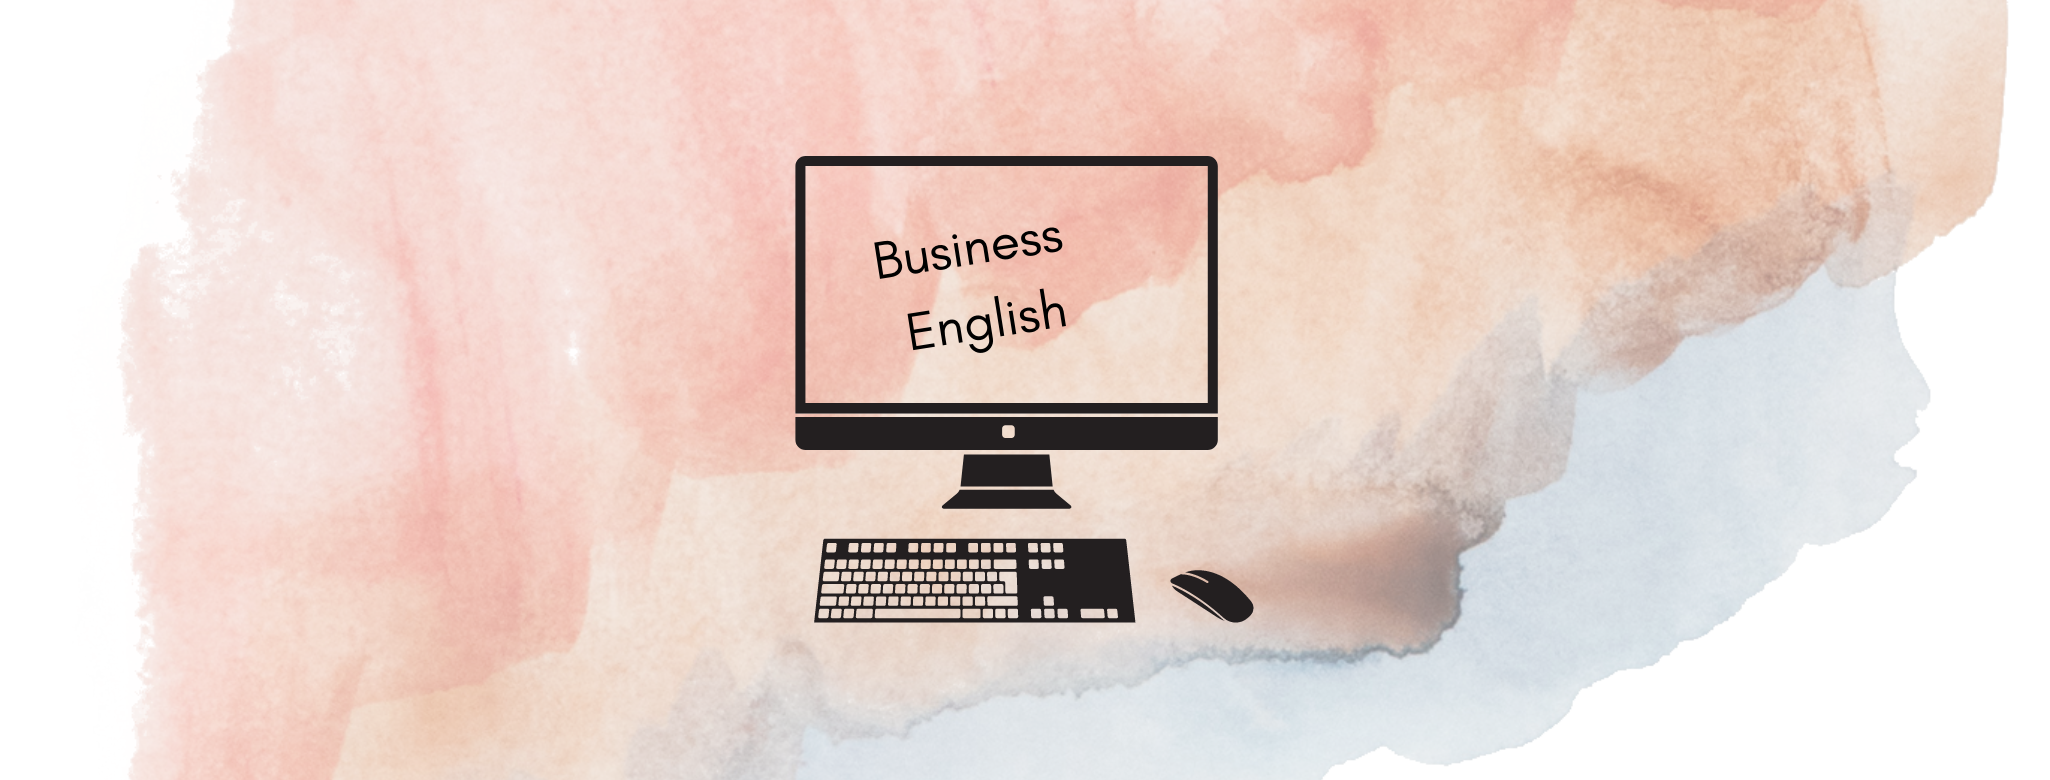 Authentic Communication: What is Business English? What’s the Difference from General English?